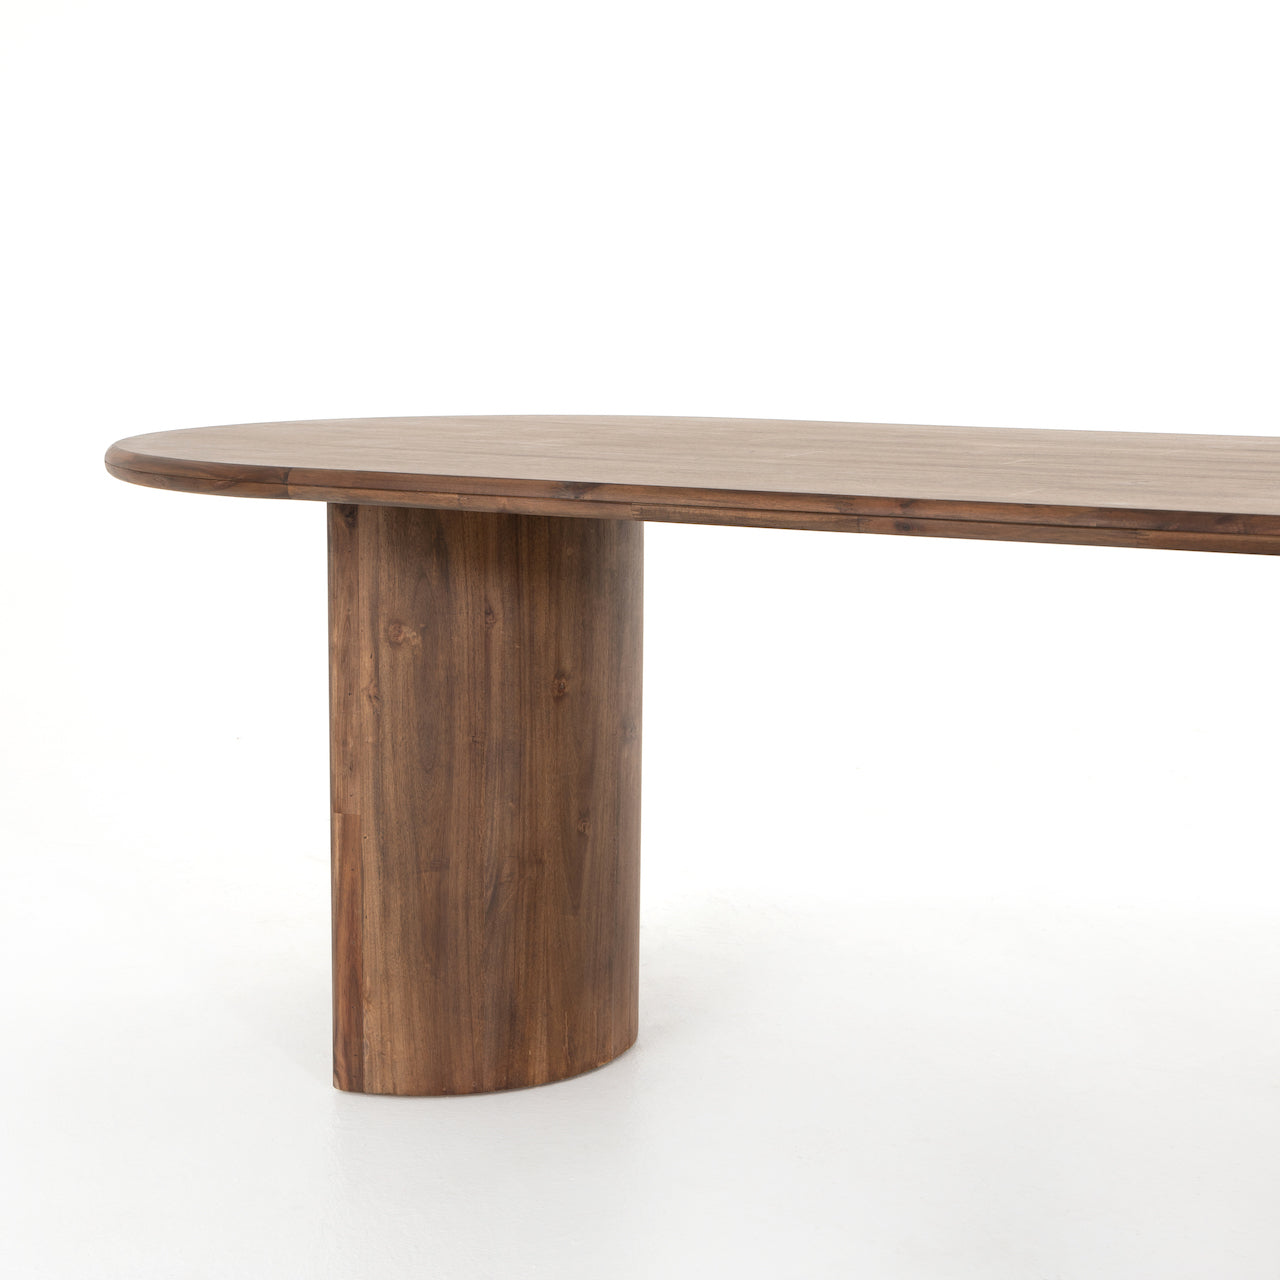 four hands paden dining table brown angle leg